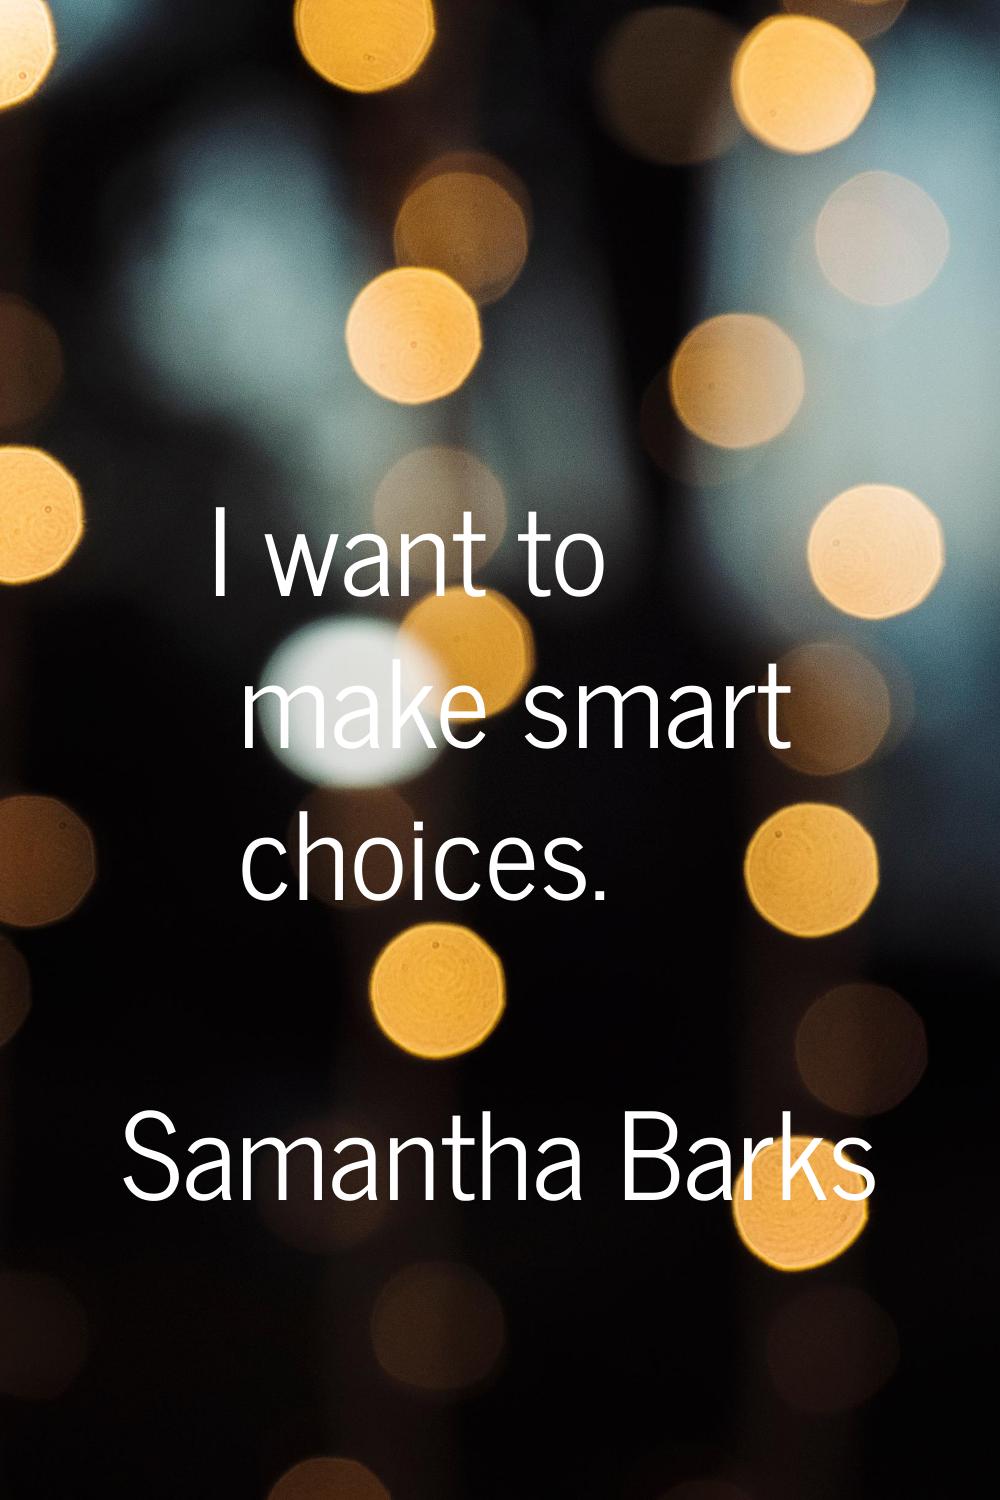 I want to make smart choices.